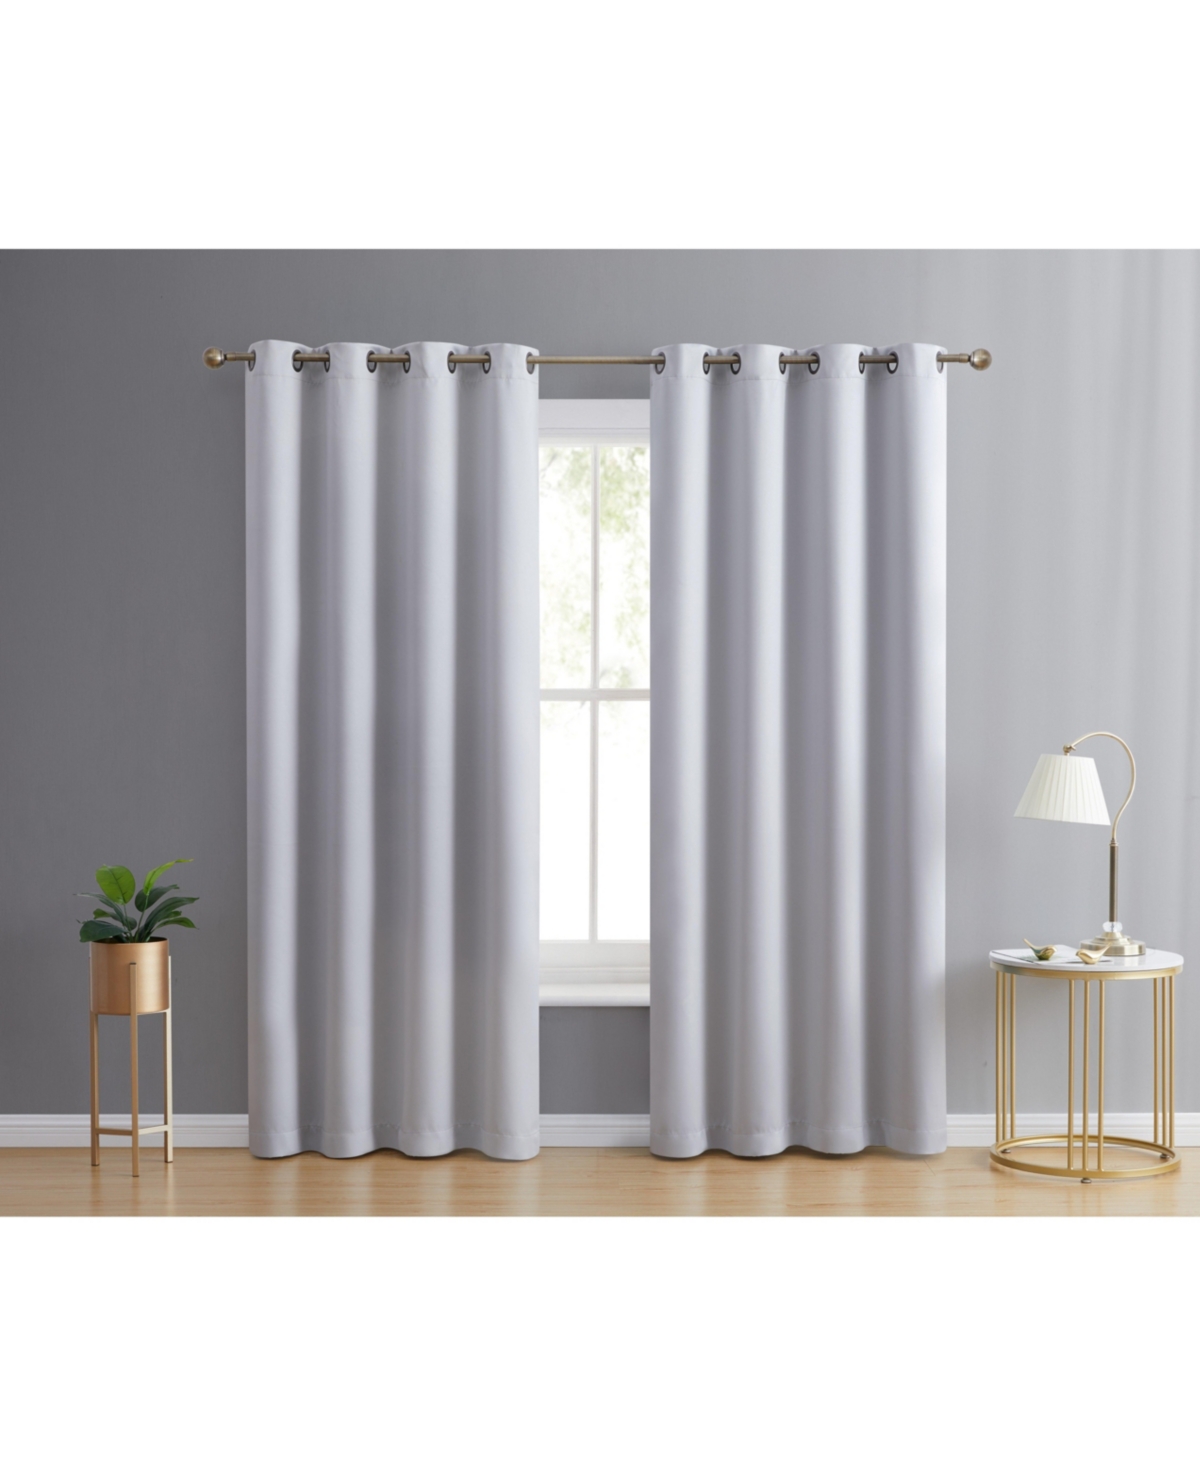 Laurance Full Shaded Blackout Curtains - Thermal Insulation Light Blocking Home Theater Grommet Window Drapery Basement Curtains, Set of 2 - An